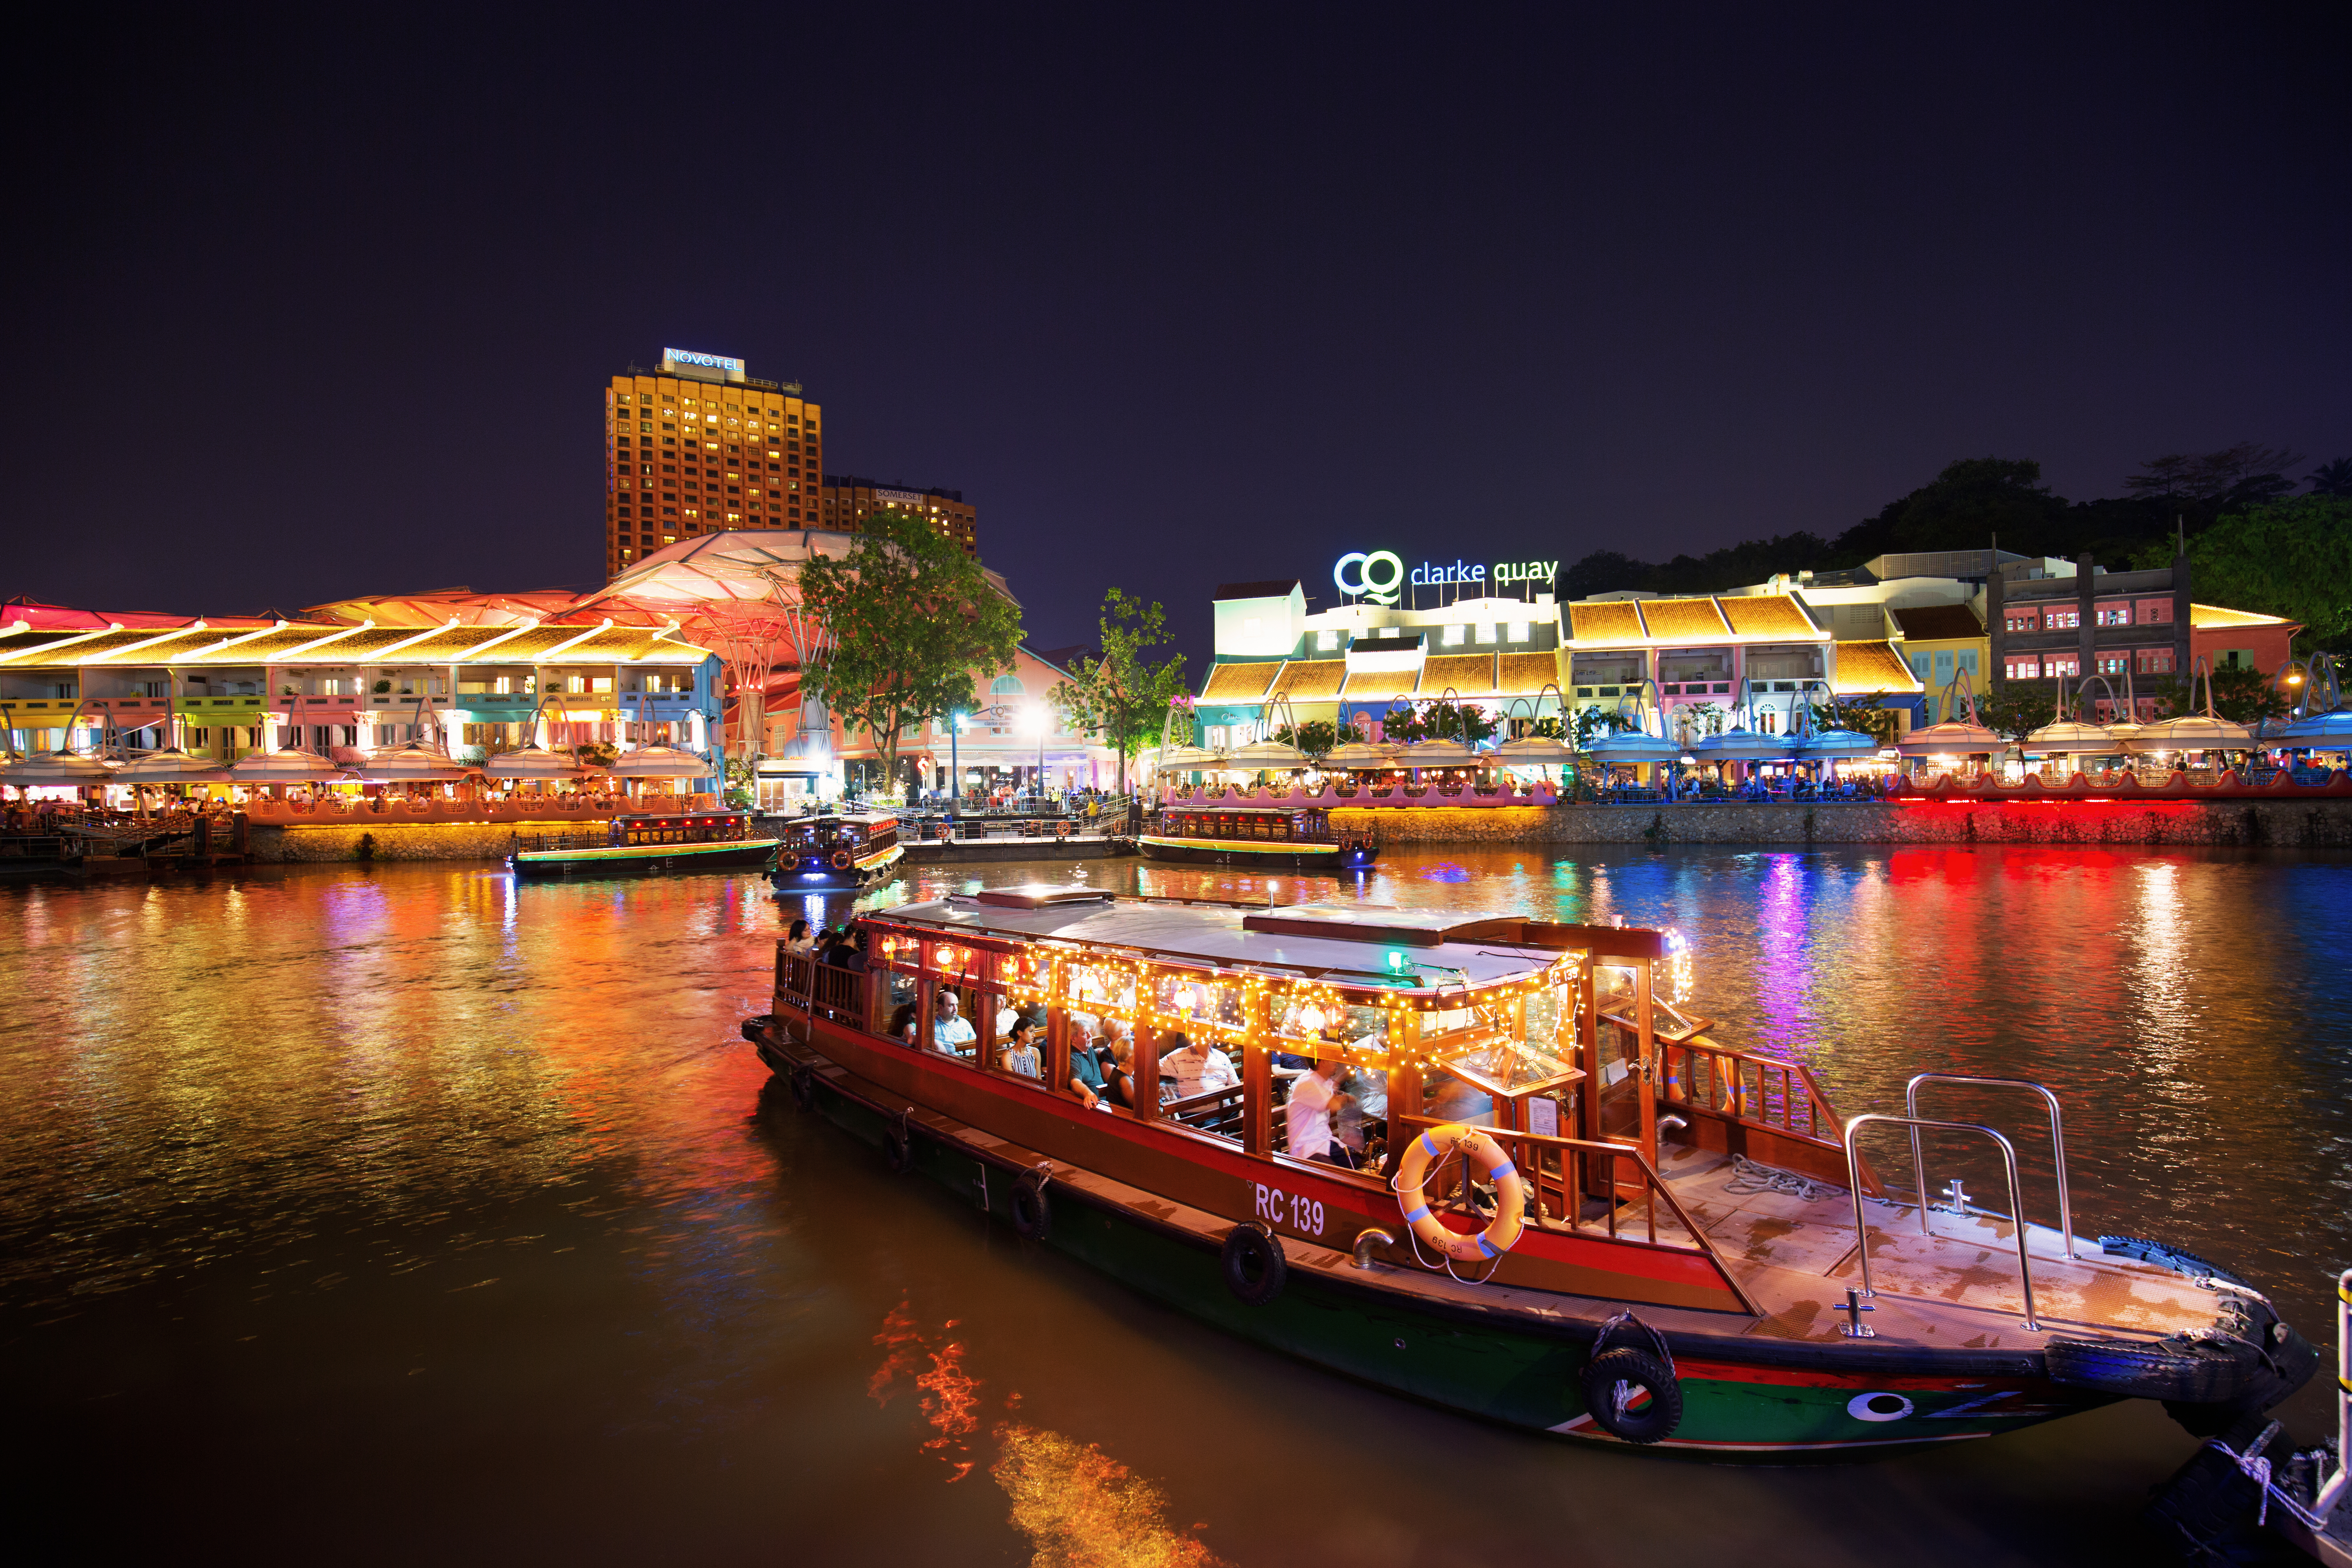 Bumboat ride along the Singapore river